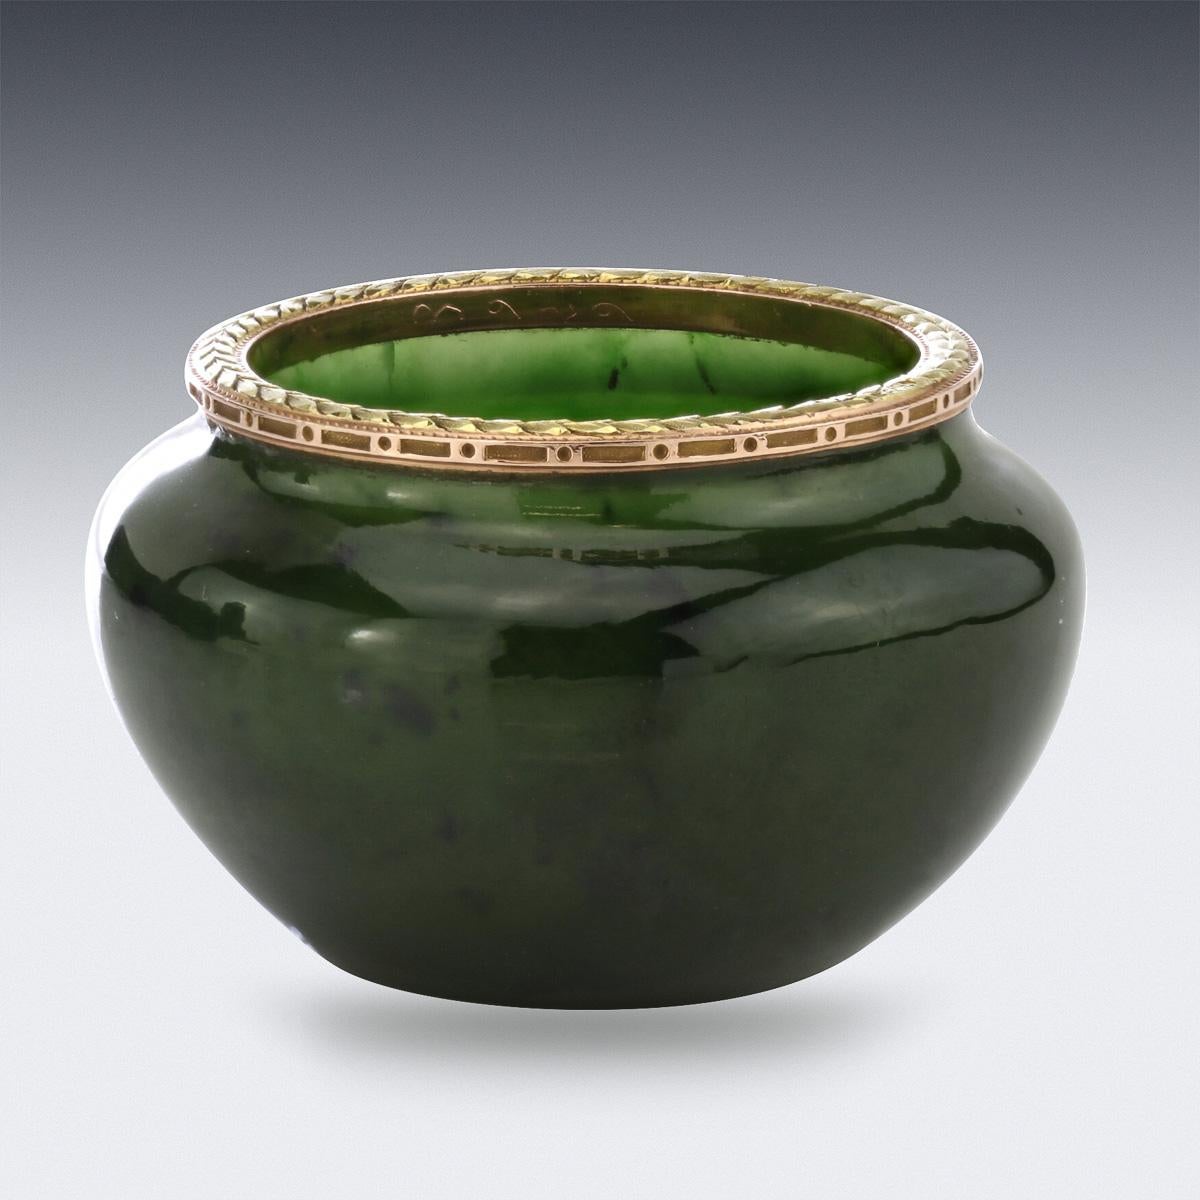 Antique early 20th century Russian Fabergé gold mounted nephrite bowl, circular bulbous body, applied with a chased laurel border. Hallmarked Russian gold 56 (585 standard), St-Petersburg, year 1899-1903, Makers mark of Michael Perchin, with